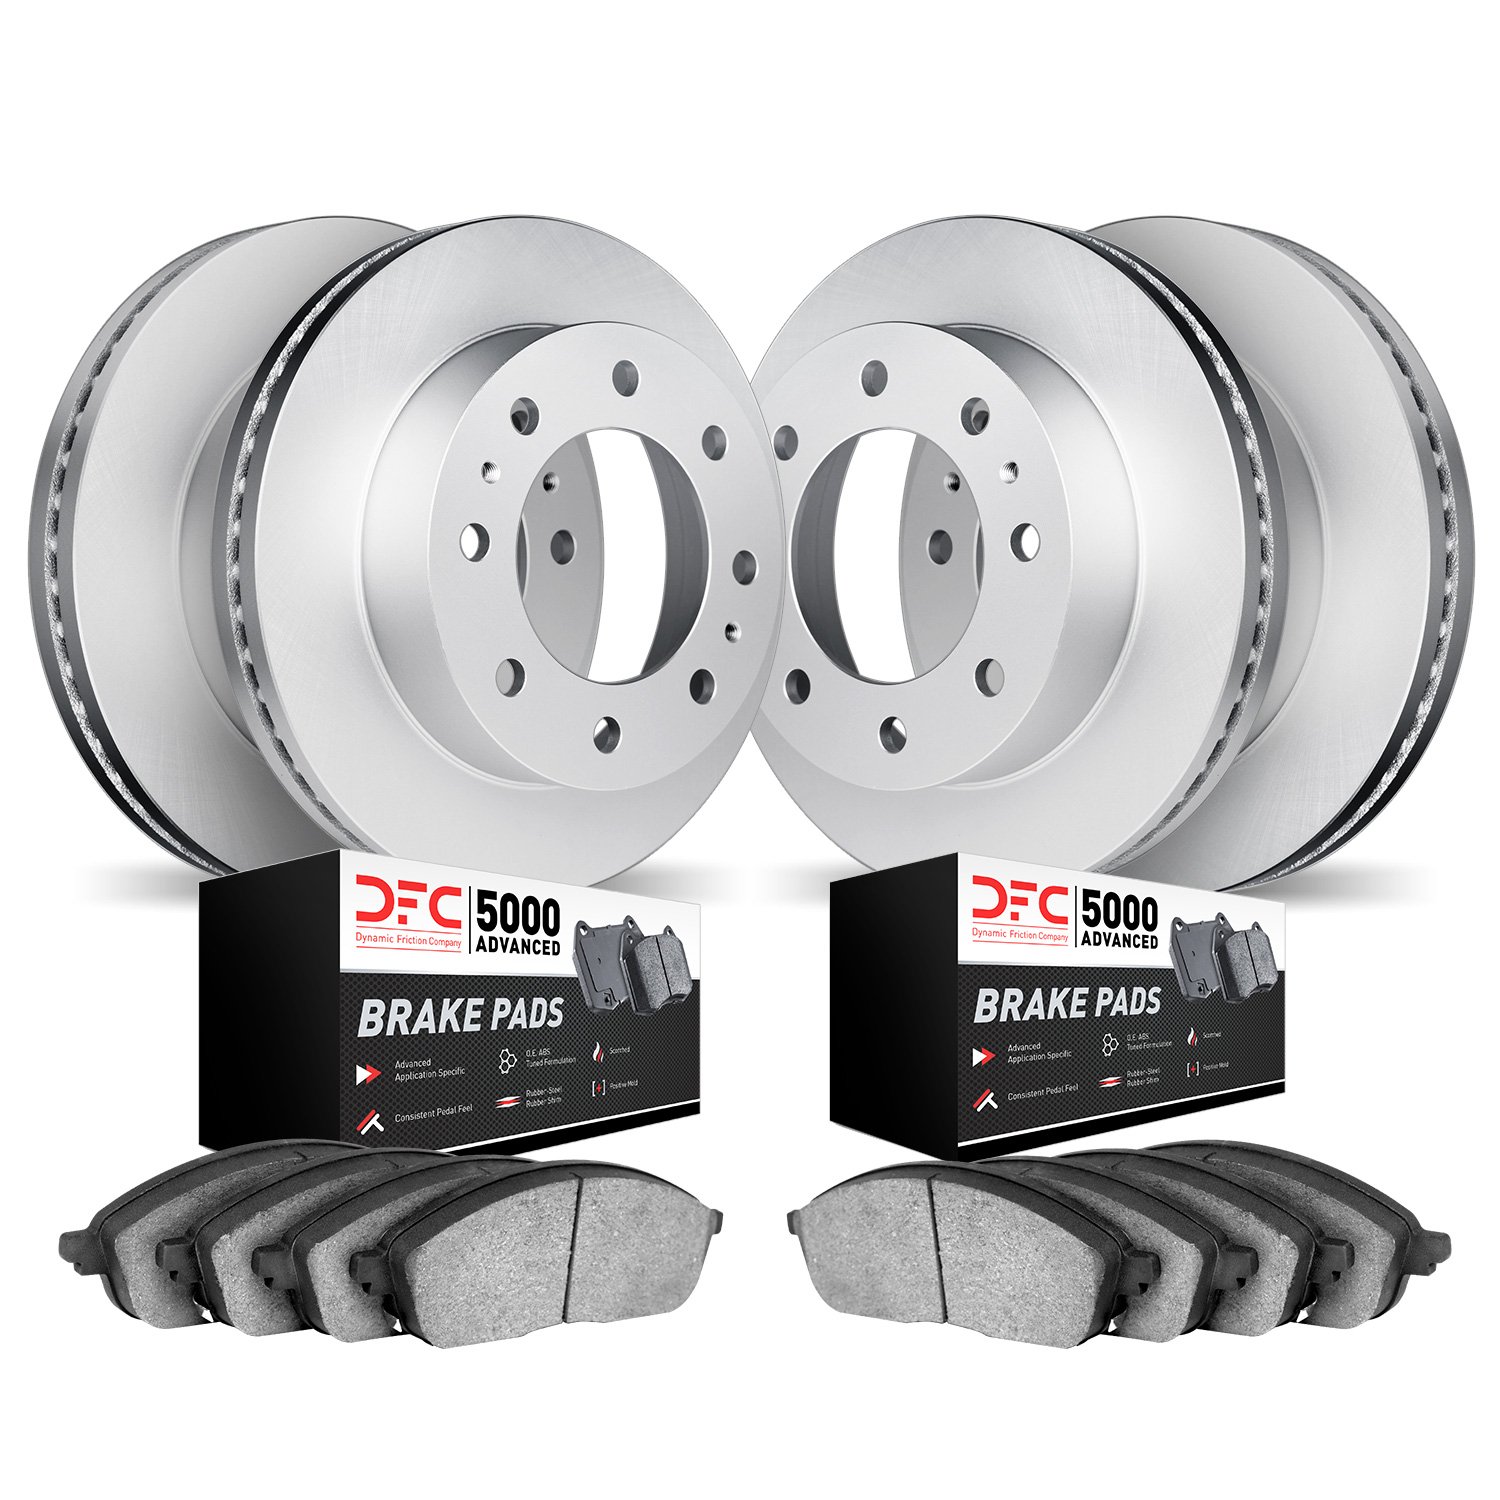 4504-48012 Geospec Brake Rotors w/5000 Advanced Brake Pads Kit, 2003-2017 GM, Position: Front and Rear